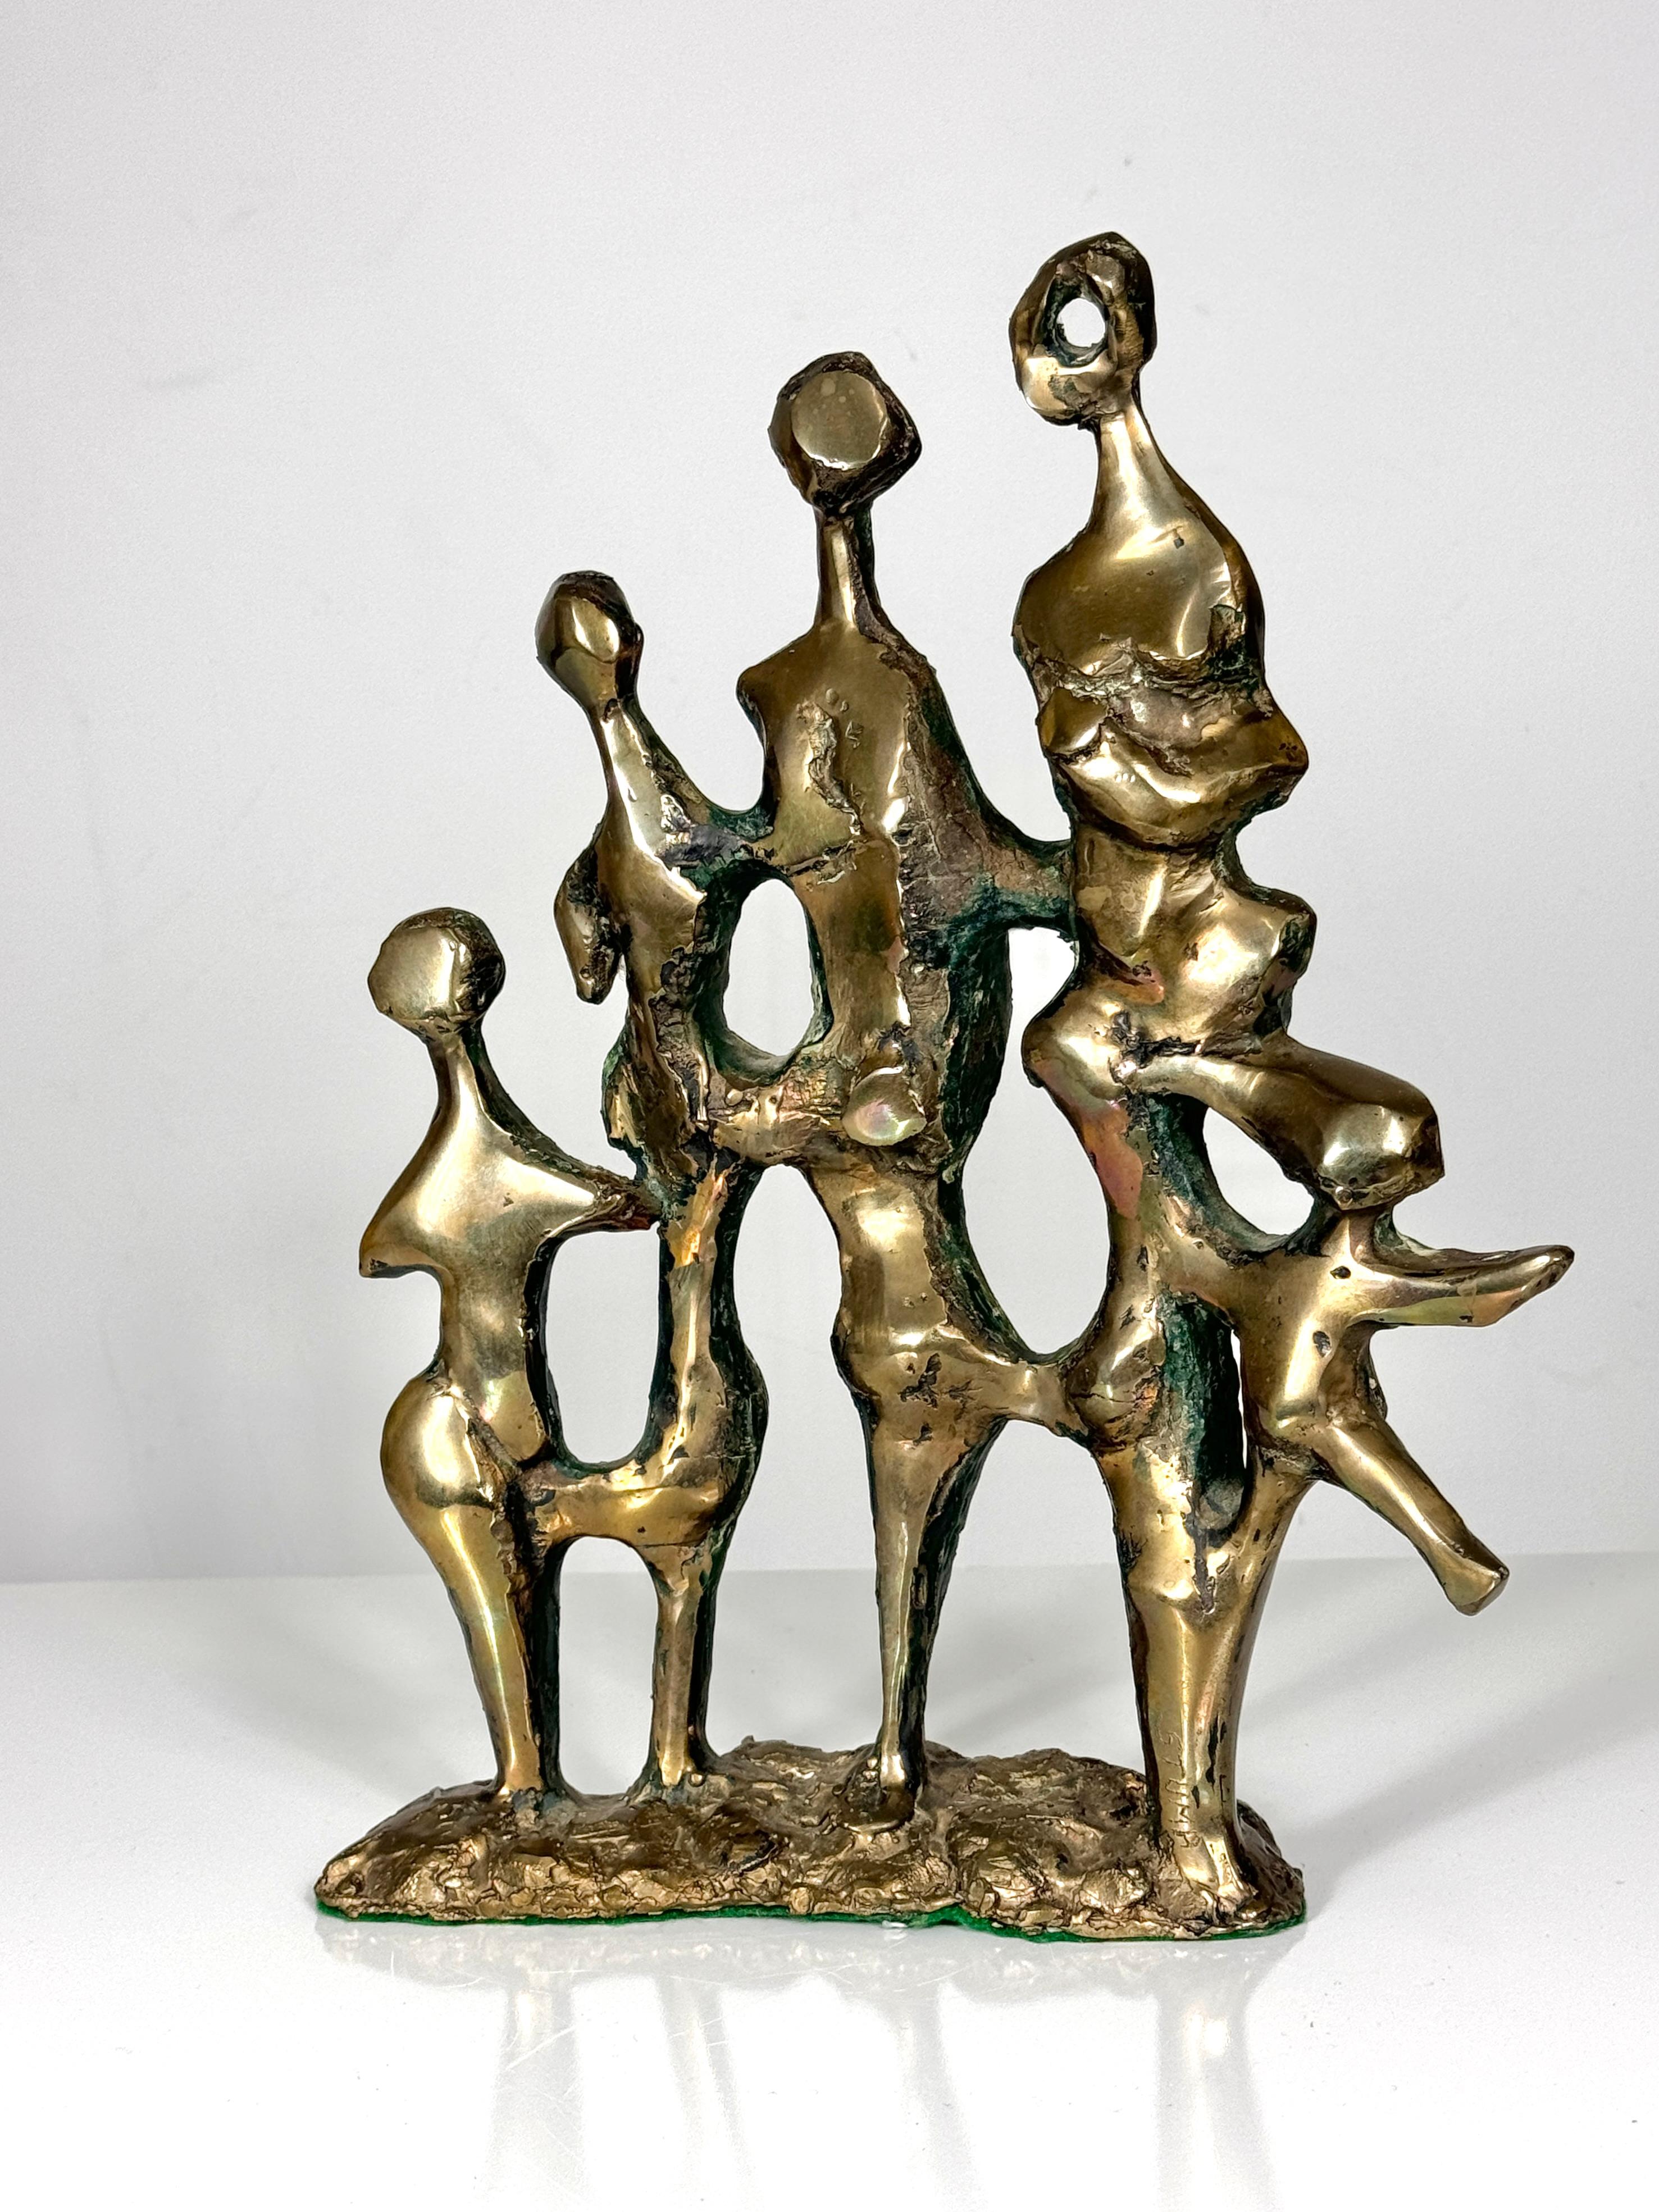 Abstract bronze sculpture by Michigan artist Pamela Stump Walsh c. 1960s
Family of brutalist figures executed in solid bronze with excellent patina
Signed to lower right

10.5 inch width
3 inch depth
13.75 inch height

Pamela Stump was the founder